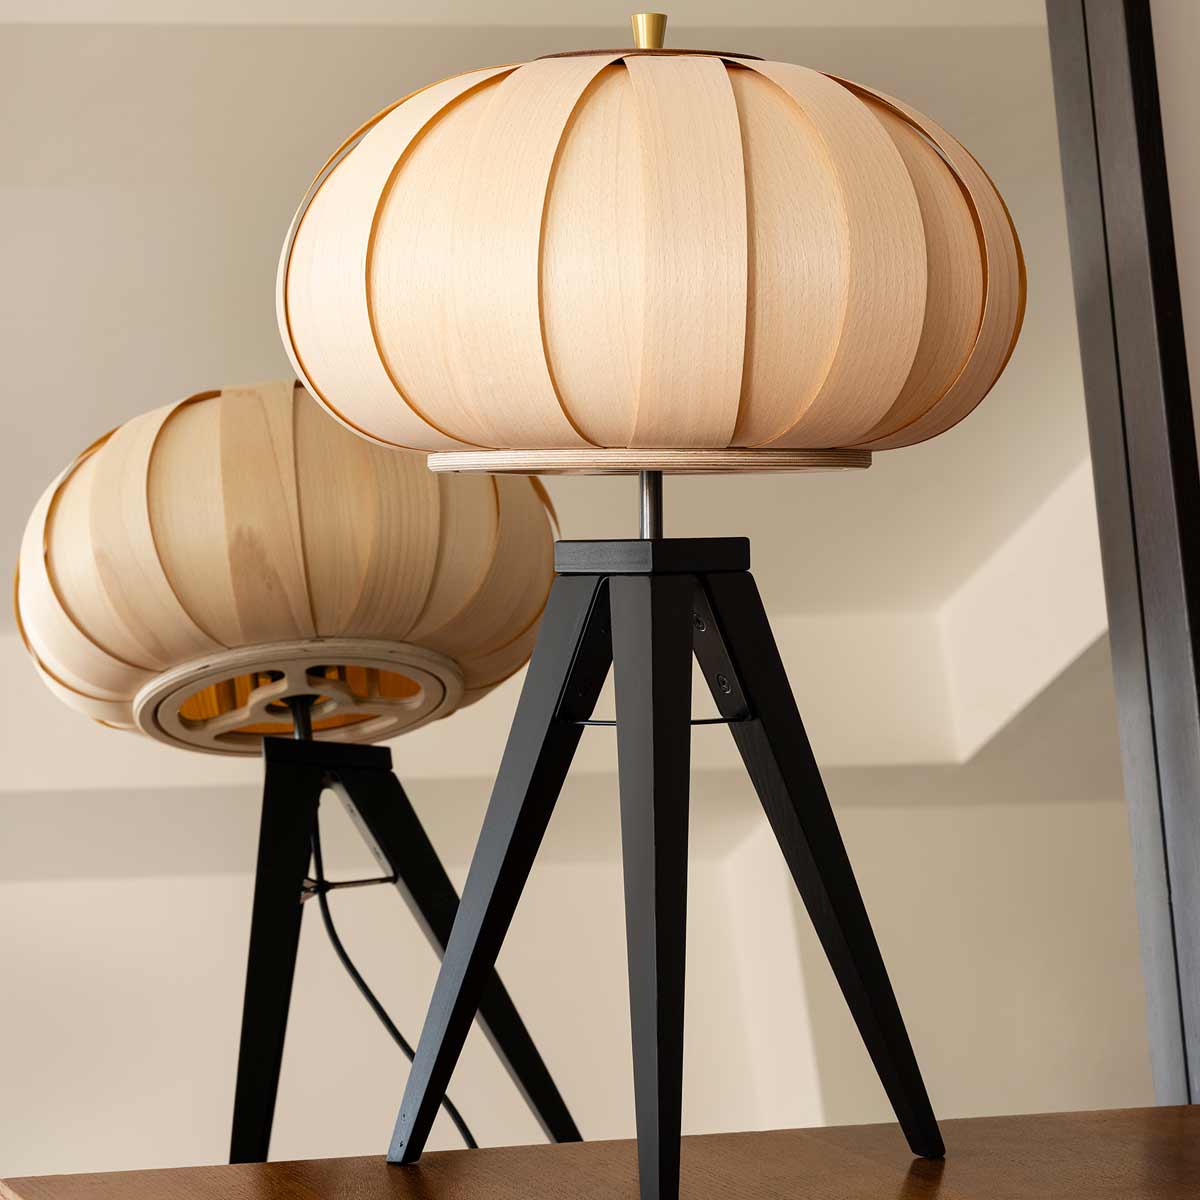 South Charlotte Fine Lighting luxury table lamp made by Storm Furniture